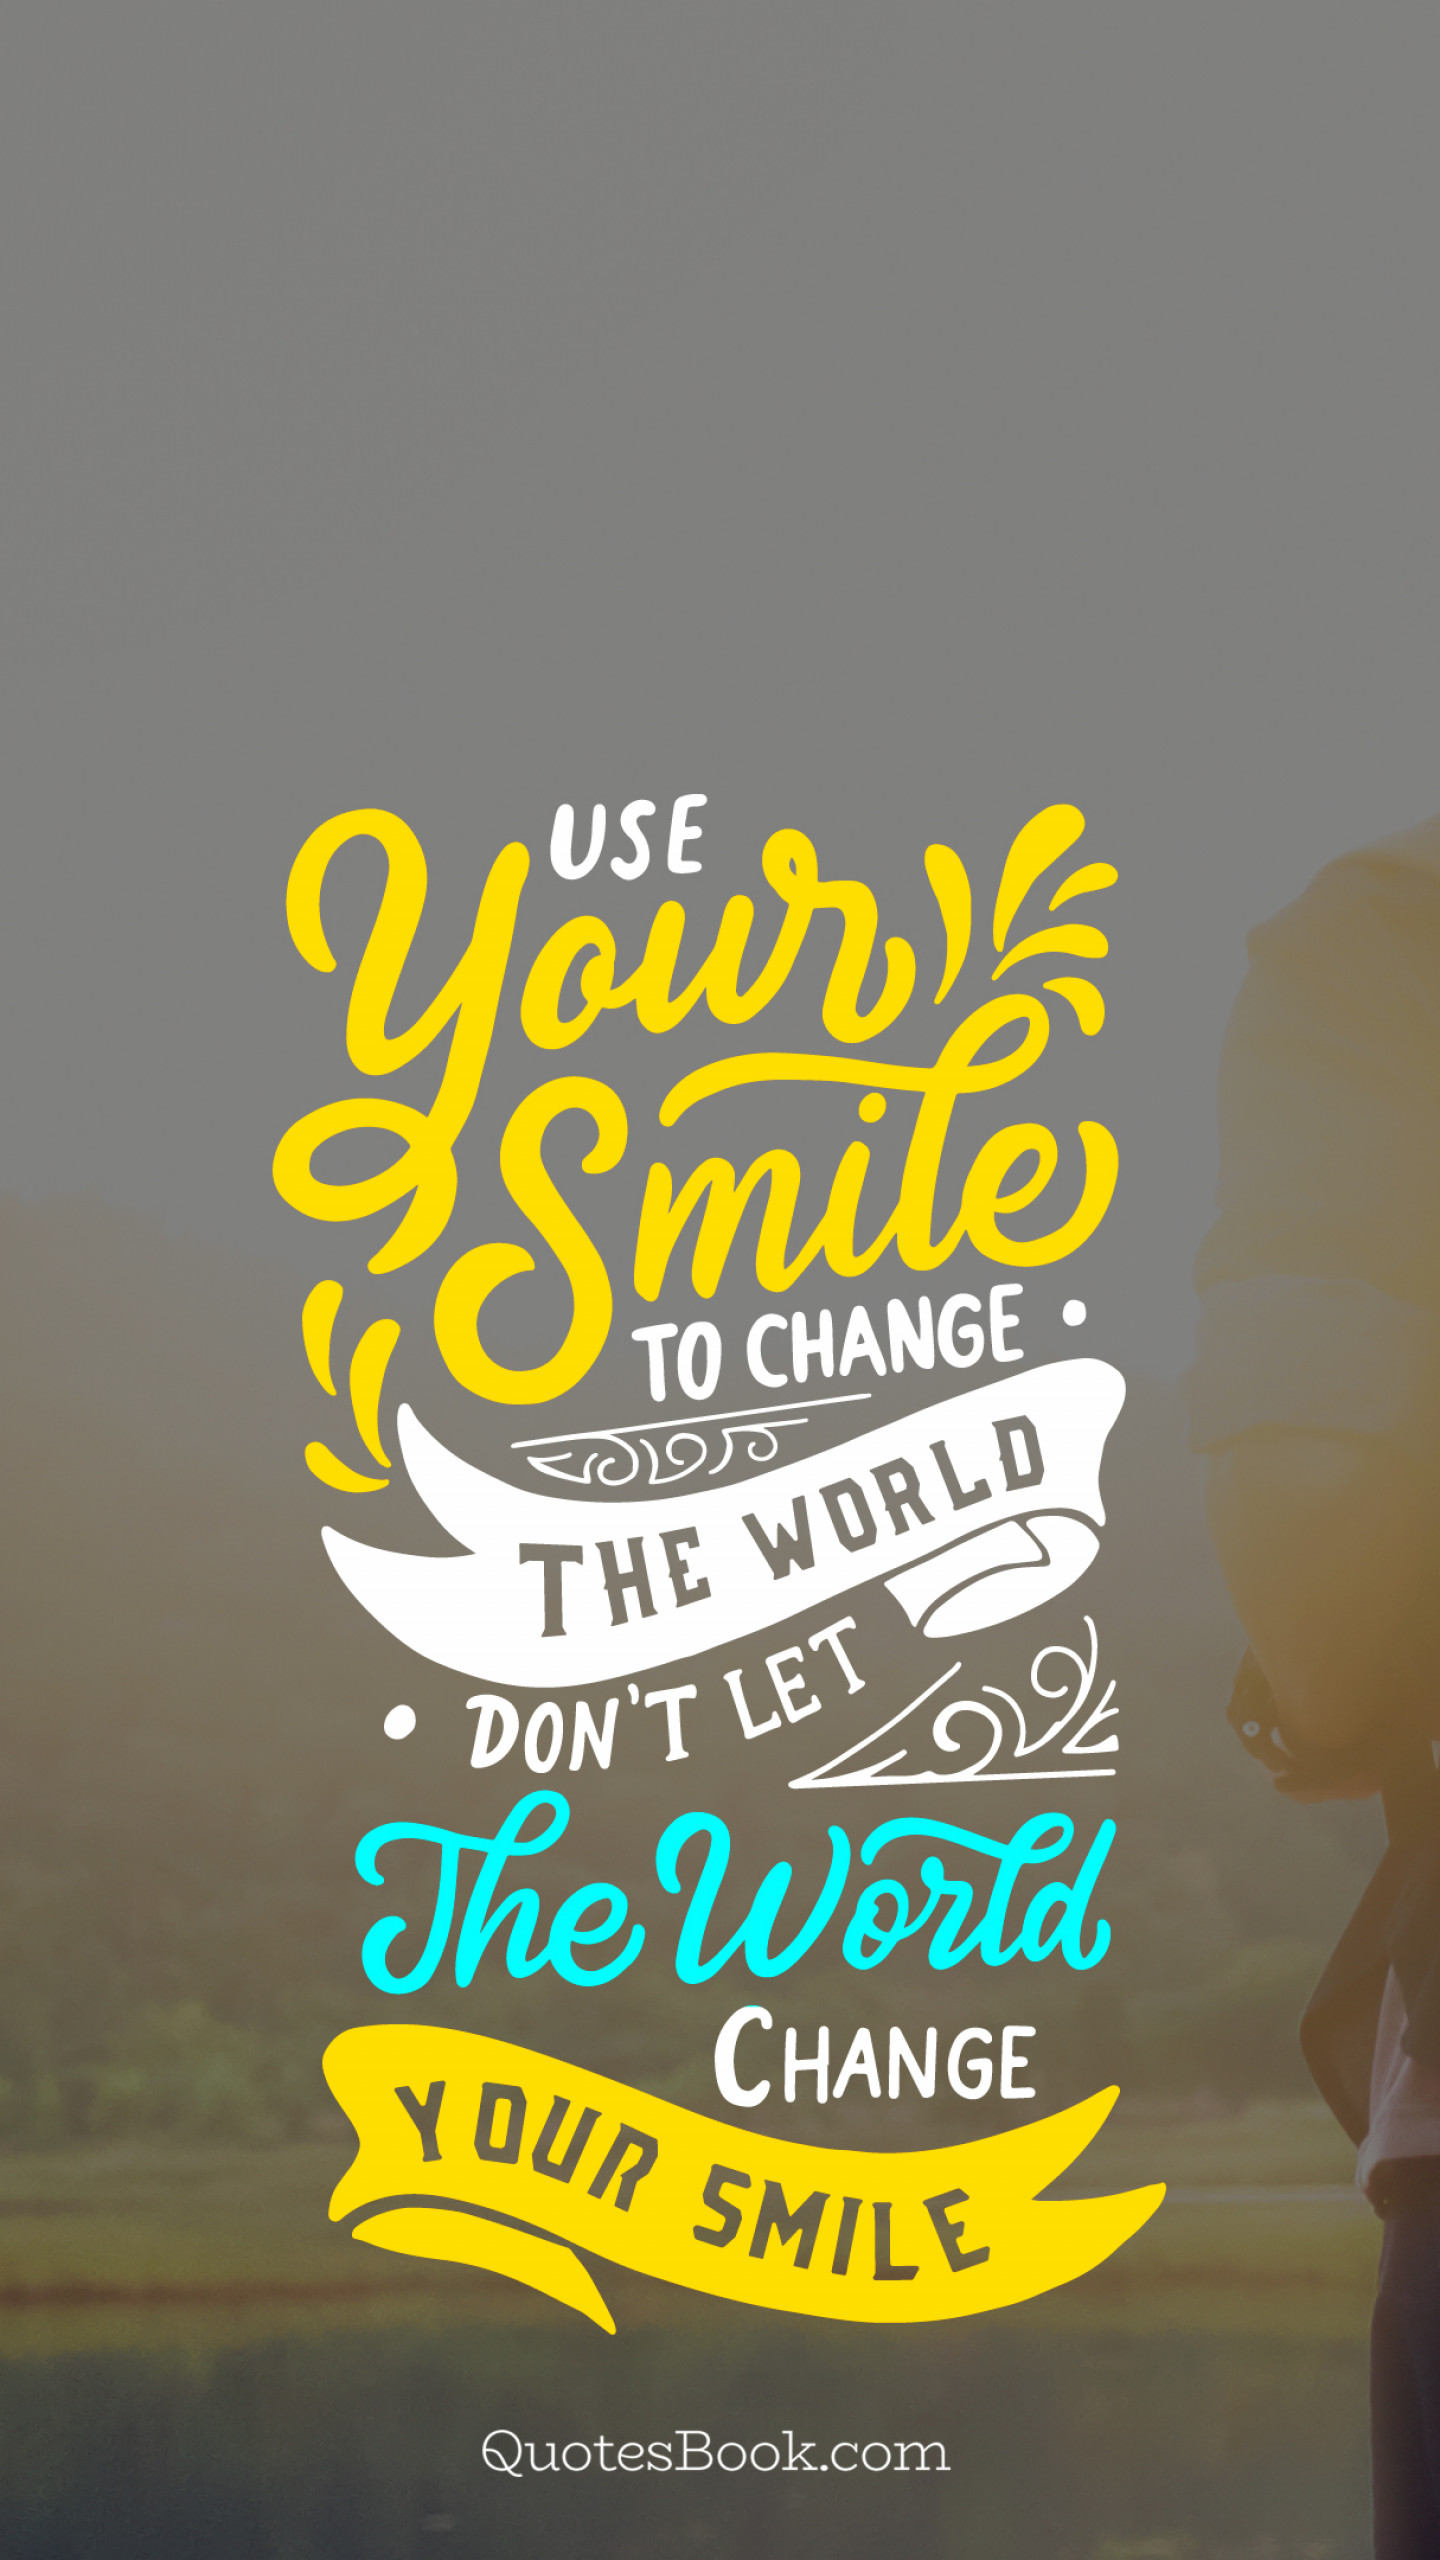 Use your smile to change the world. Don't let the world change your